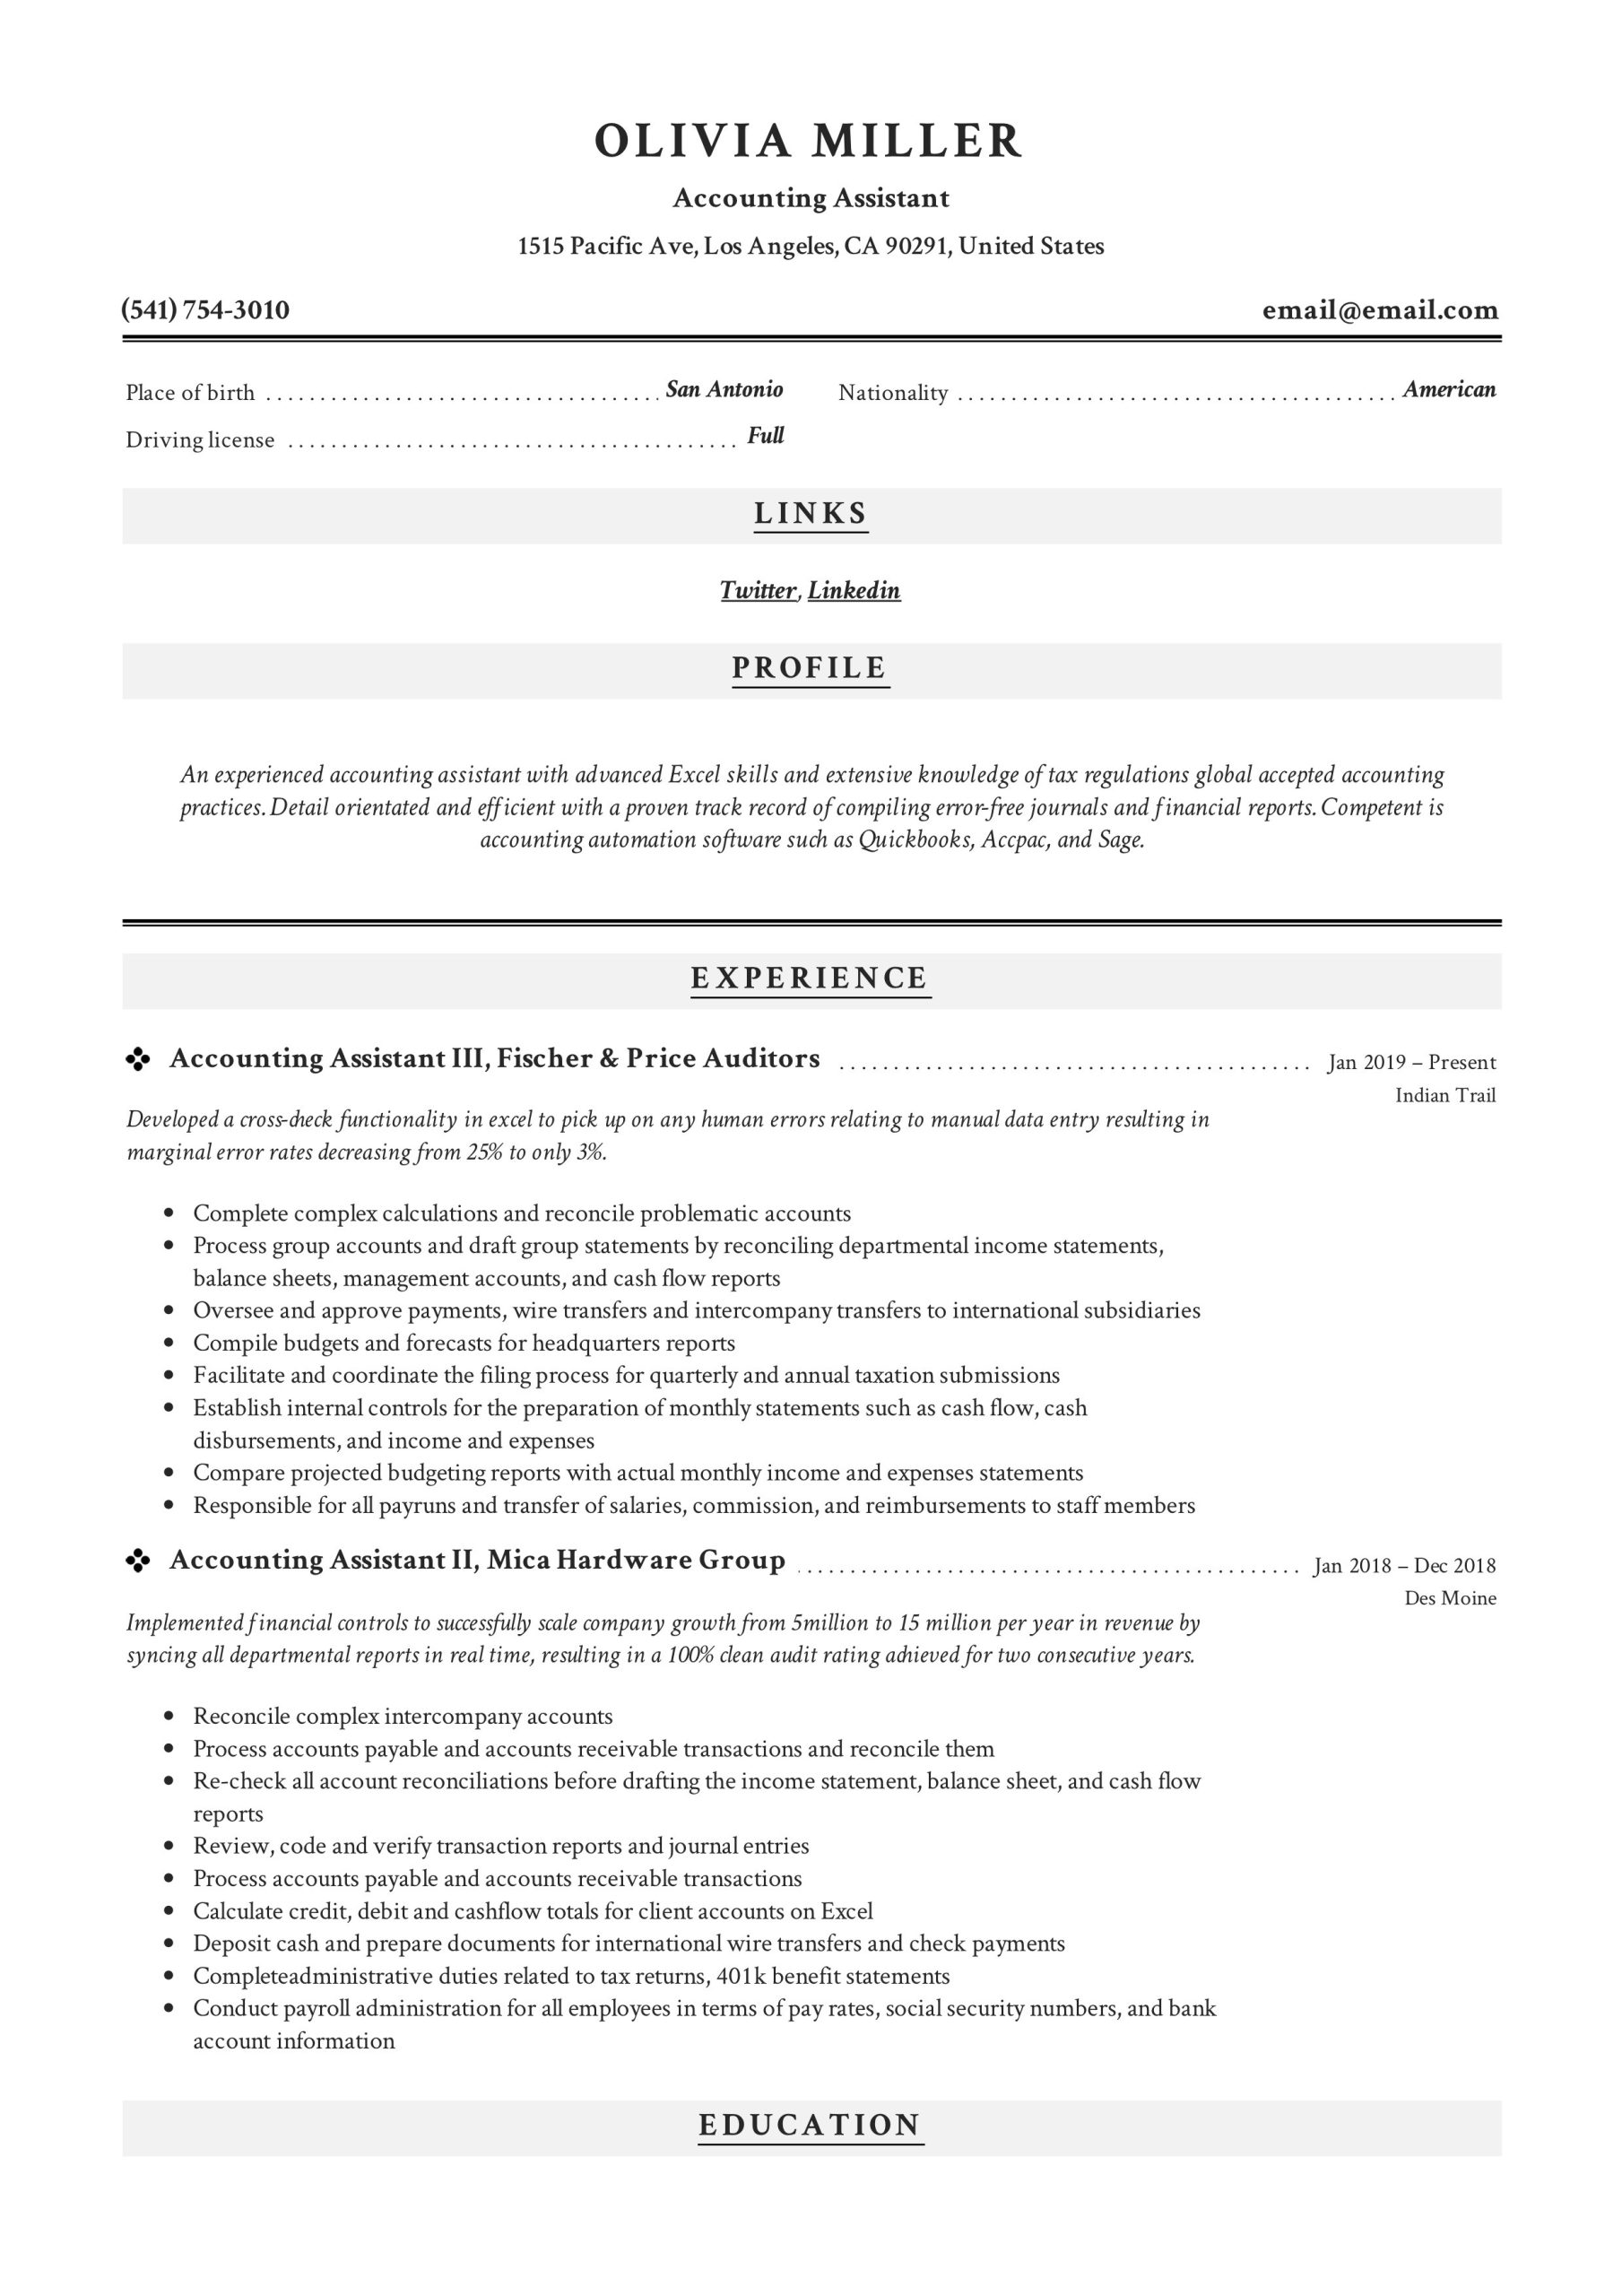 25 Year In Finance Sample Resume Accounting & Finance Resume Examples 2022 Free Pdf’s